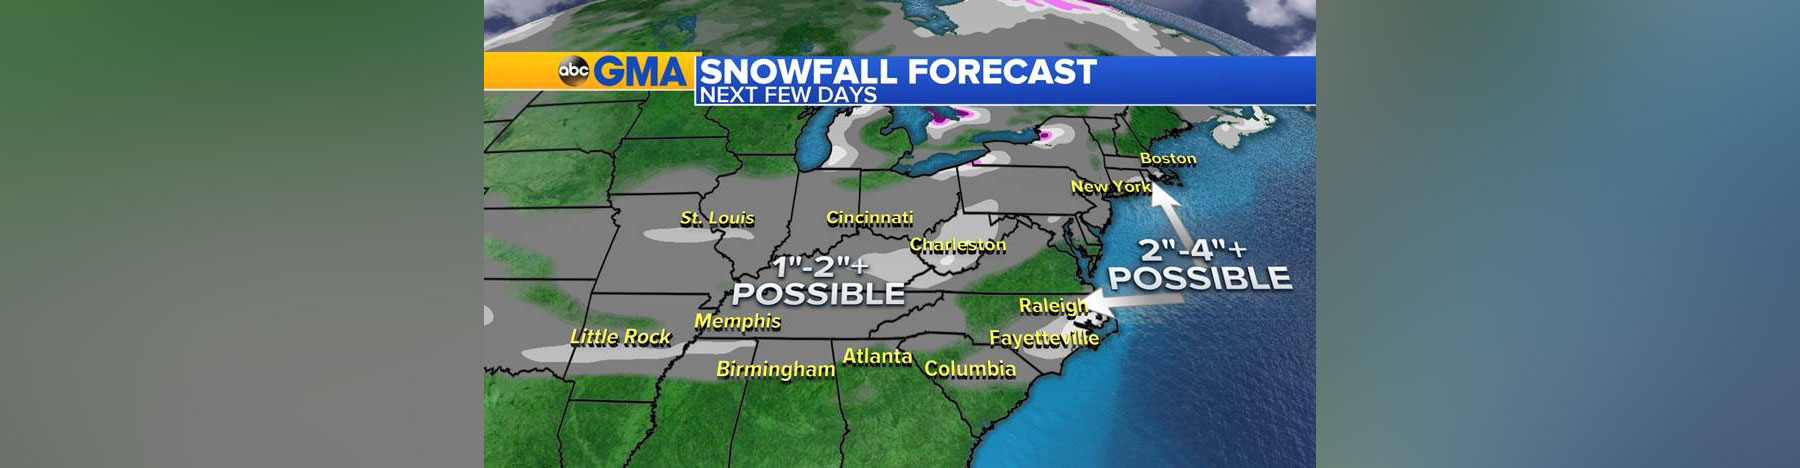 PHOTO: The scope of the projected snowfall stretches from the Ohio Valley to the Deep South and up to the Northeast